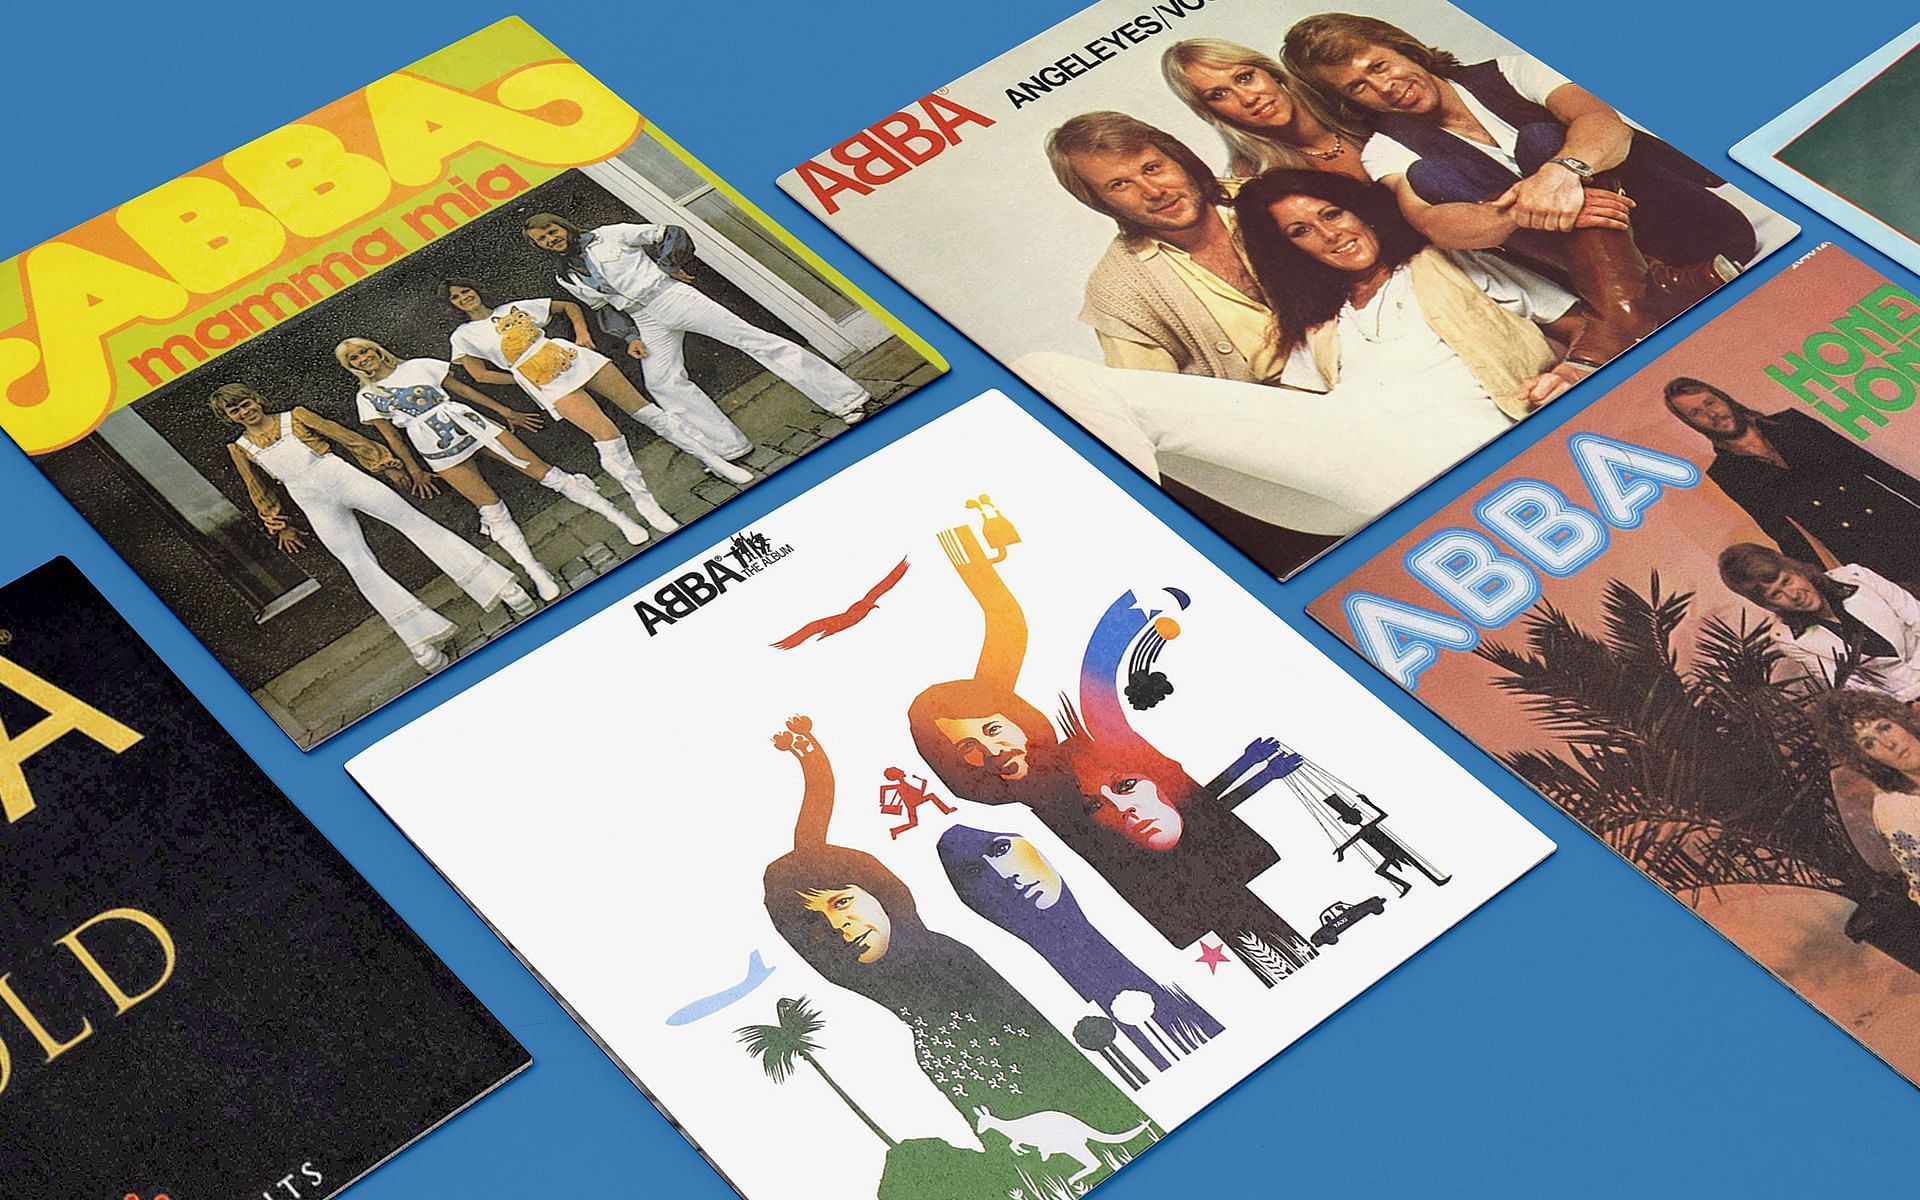 The Swedish pop group&#039;s comeback album proves that vinyl records are much more than a nostalgic collectible (Image via ABBA)